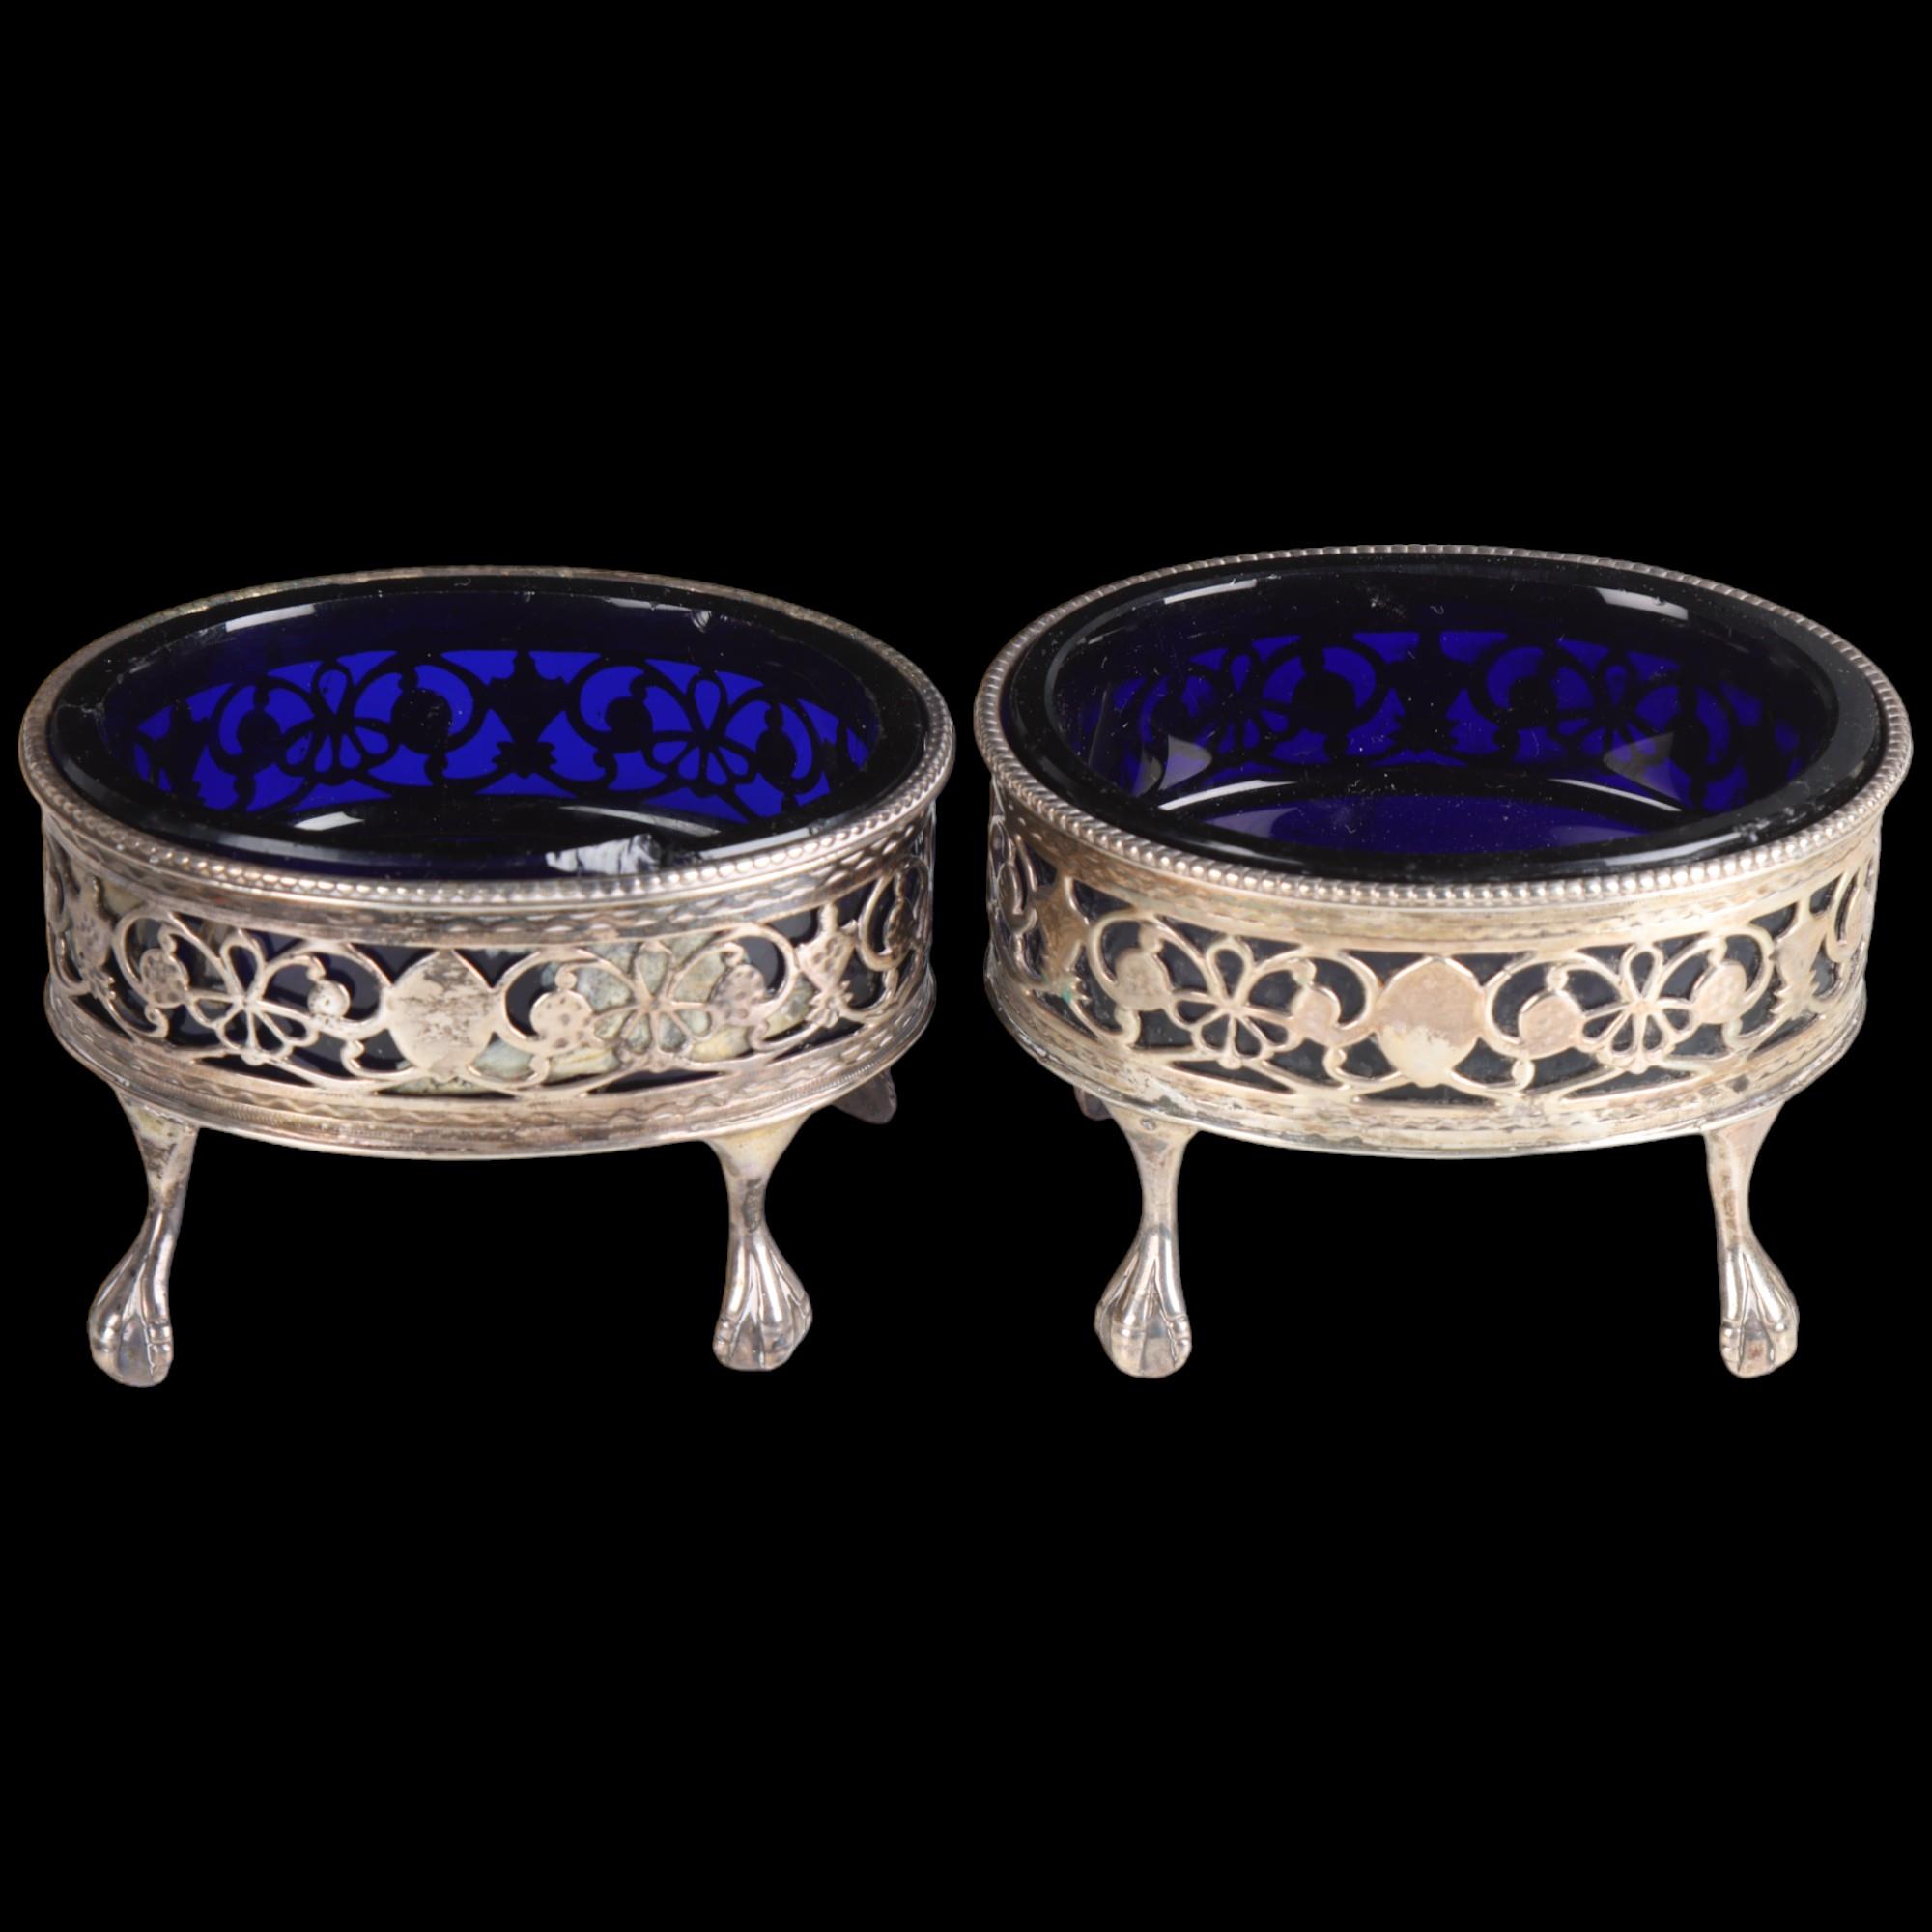 A pair of George III silver table salt cellars, possibly Thomas Dicks, London 1817, oval form with